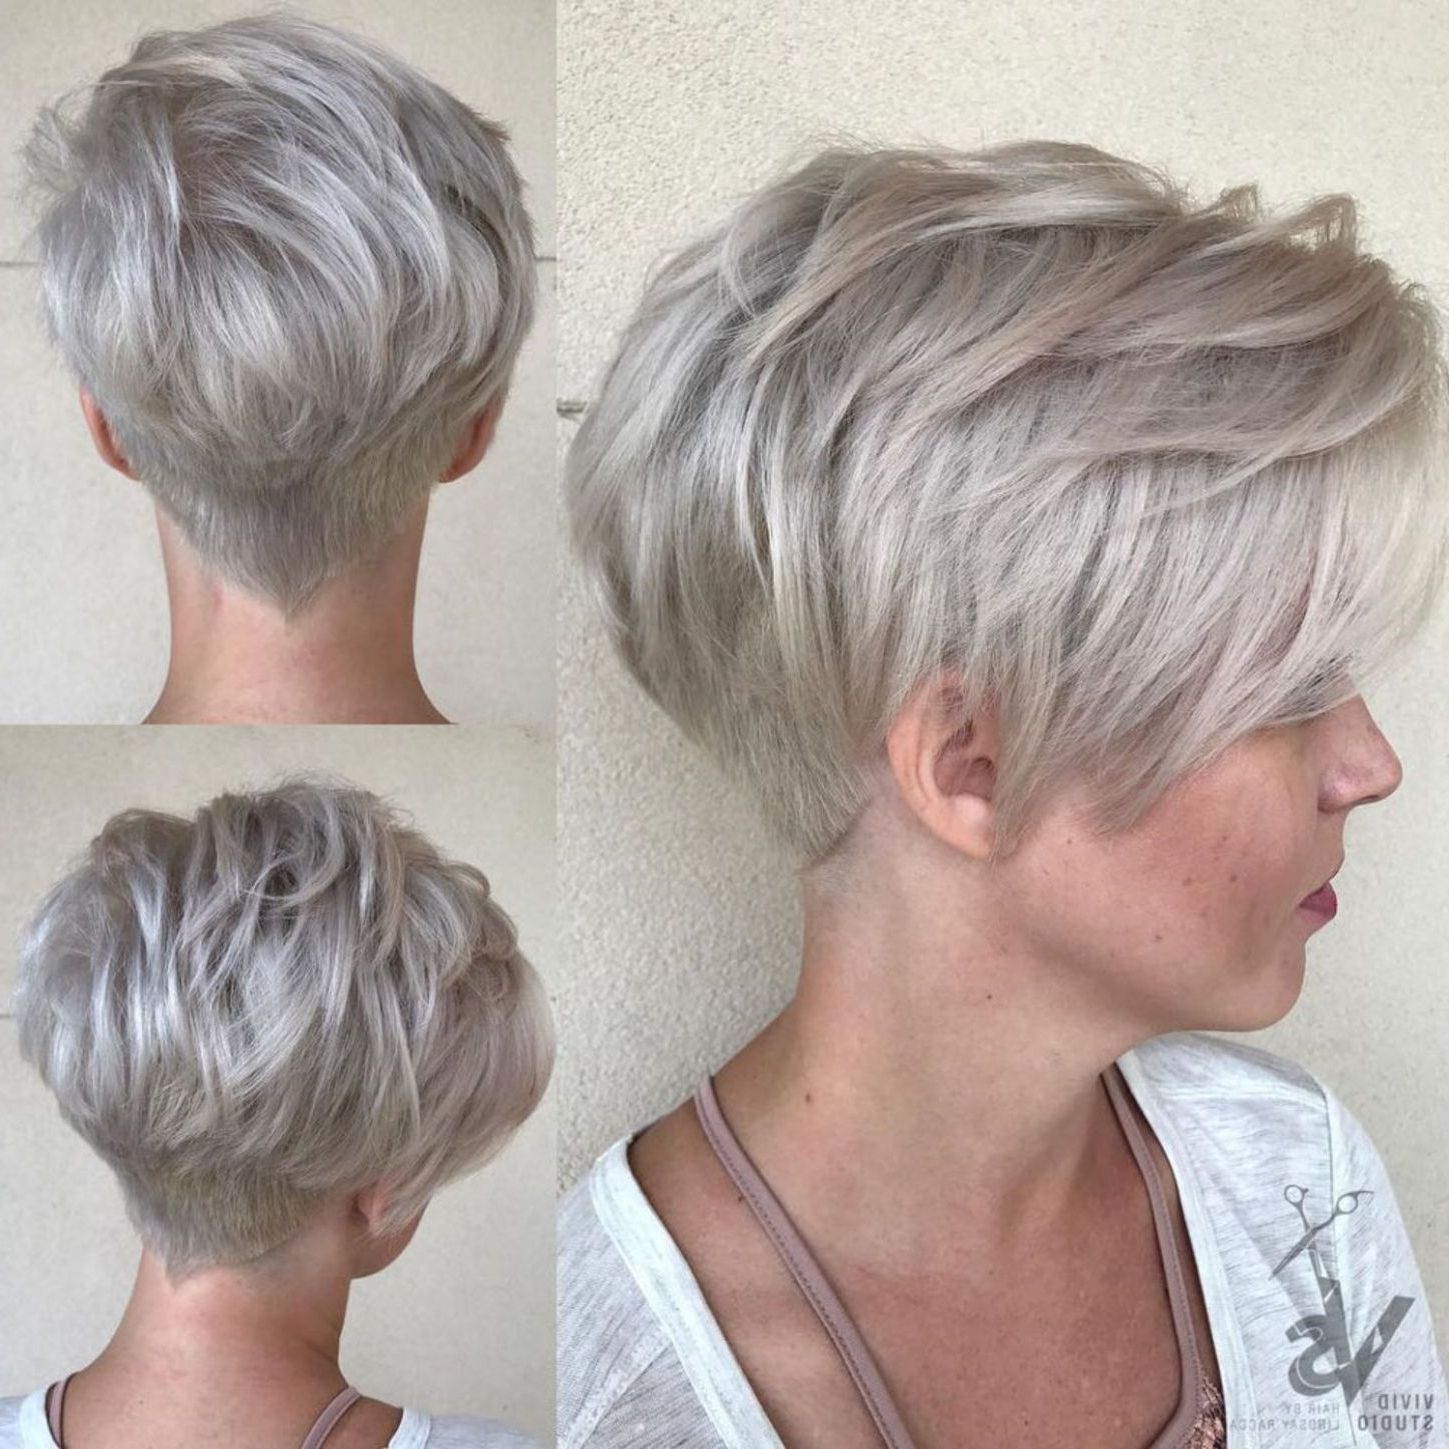 Fashion : Hairstyles Choppy Pixie Cut Round Face Ravishing With Regard To Cropped Haircuts For A Round Face (View 4 of 20)